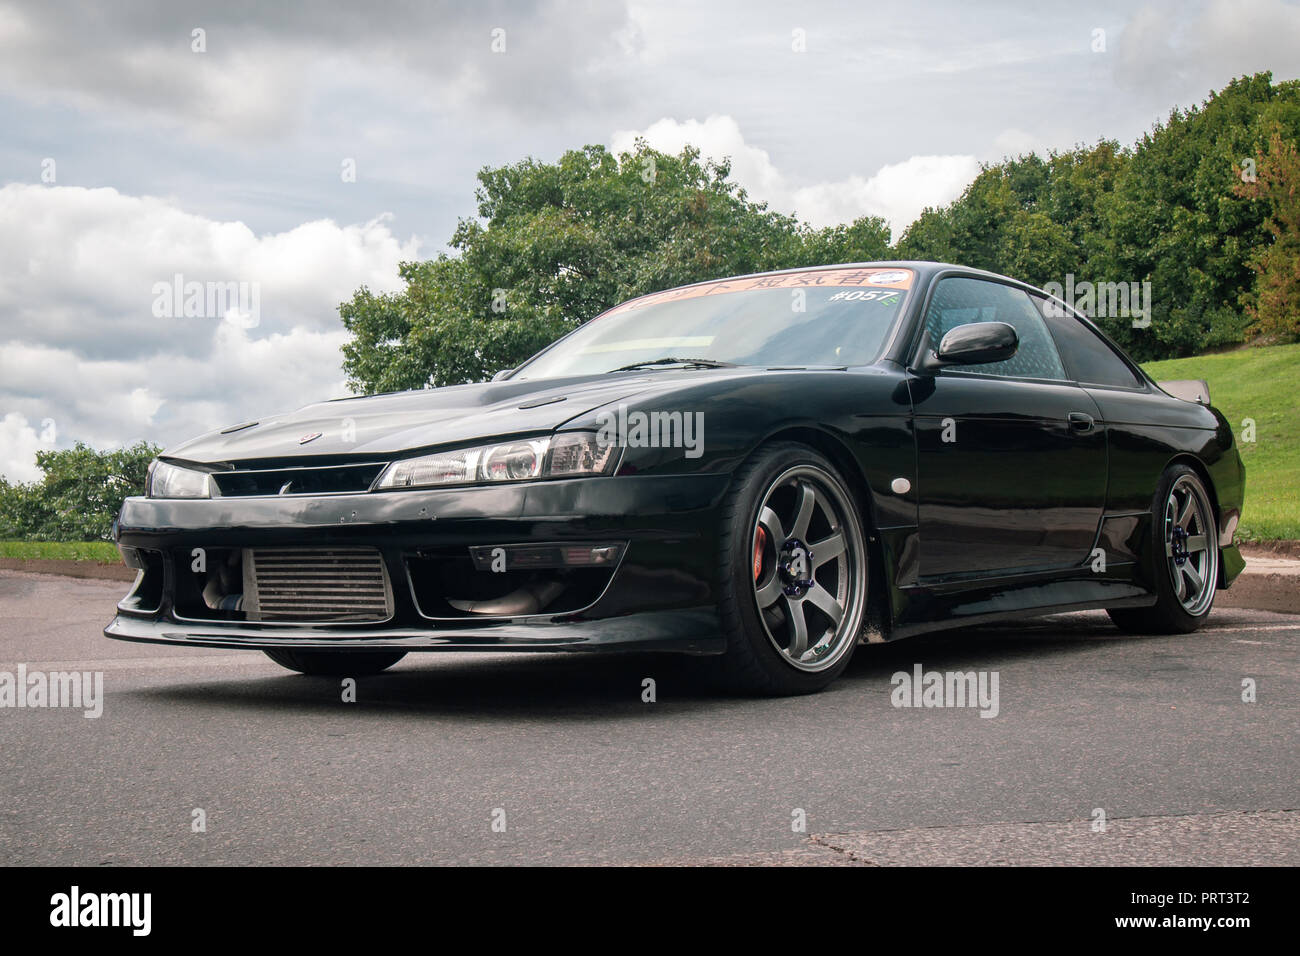 VILNIUS, LITHUANIA-AUGUST 26, 2018: Nissan 200SX (S14 Silvia, Fifth generation) at the city streets. Stock Photo